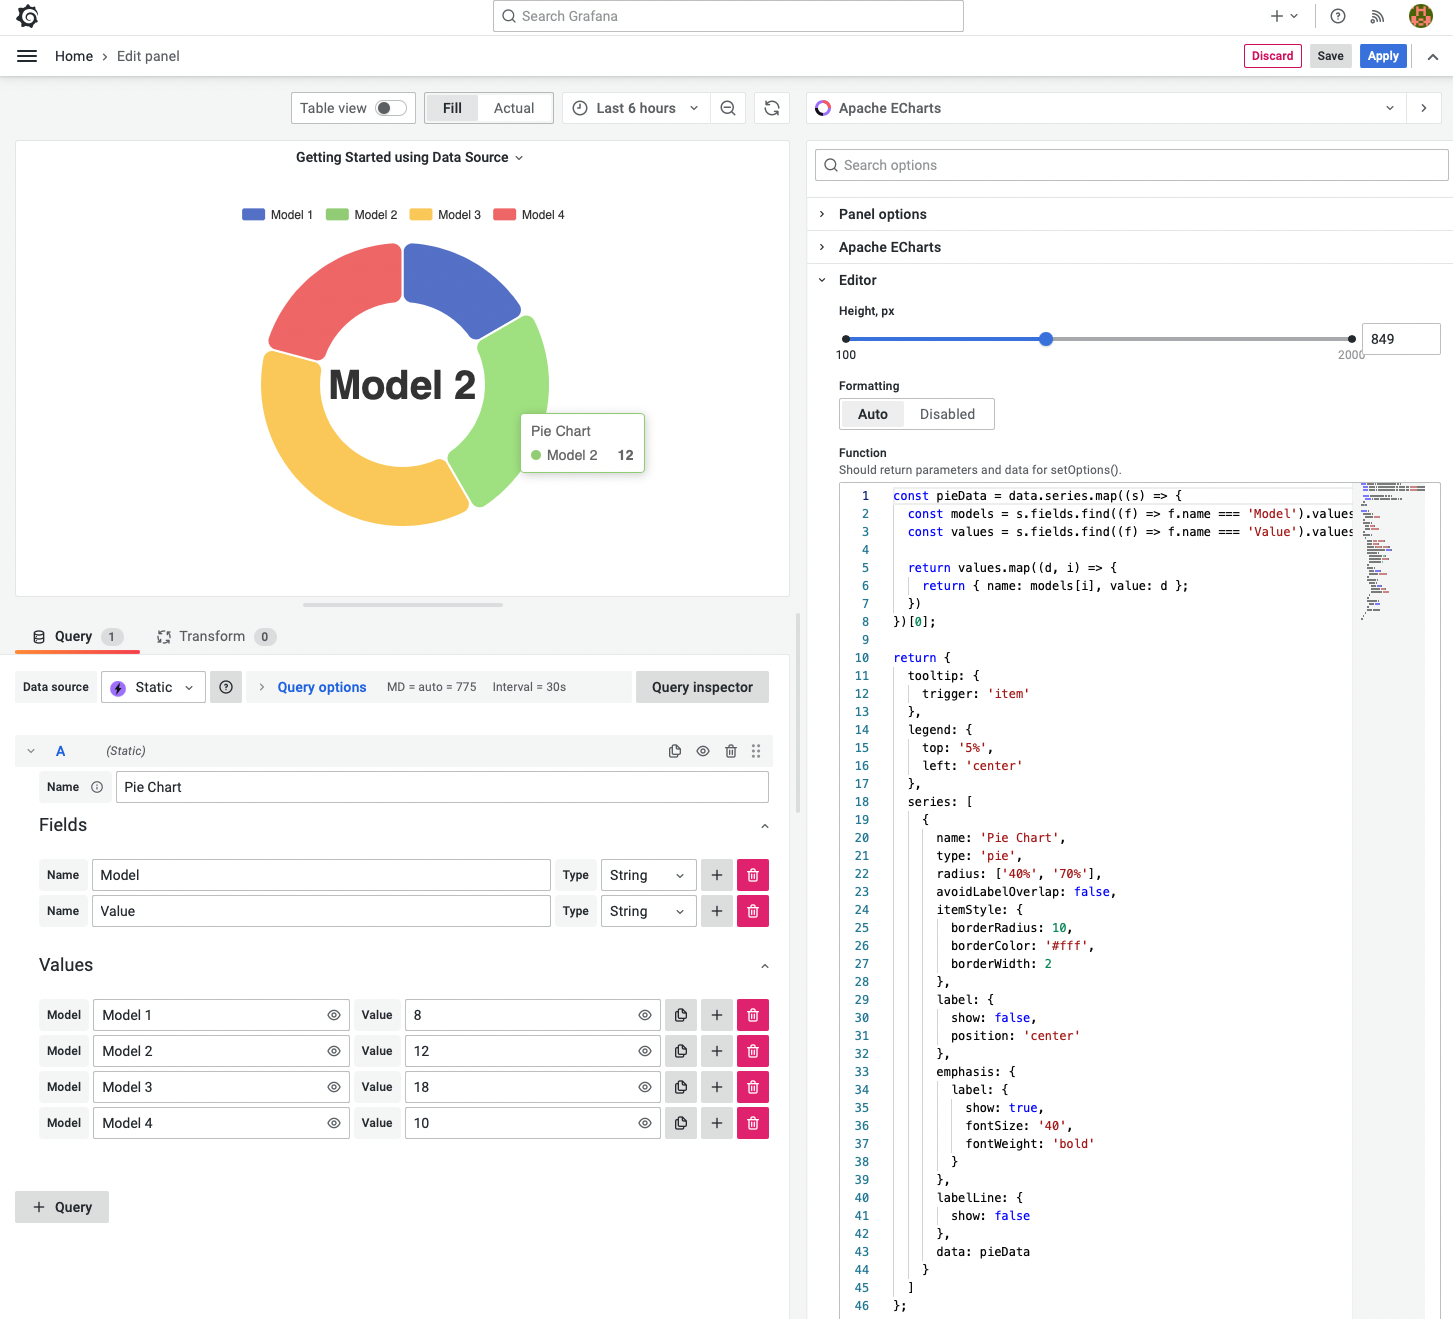 Apache ECharts visualizes a pie chart from a static data source.